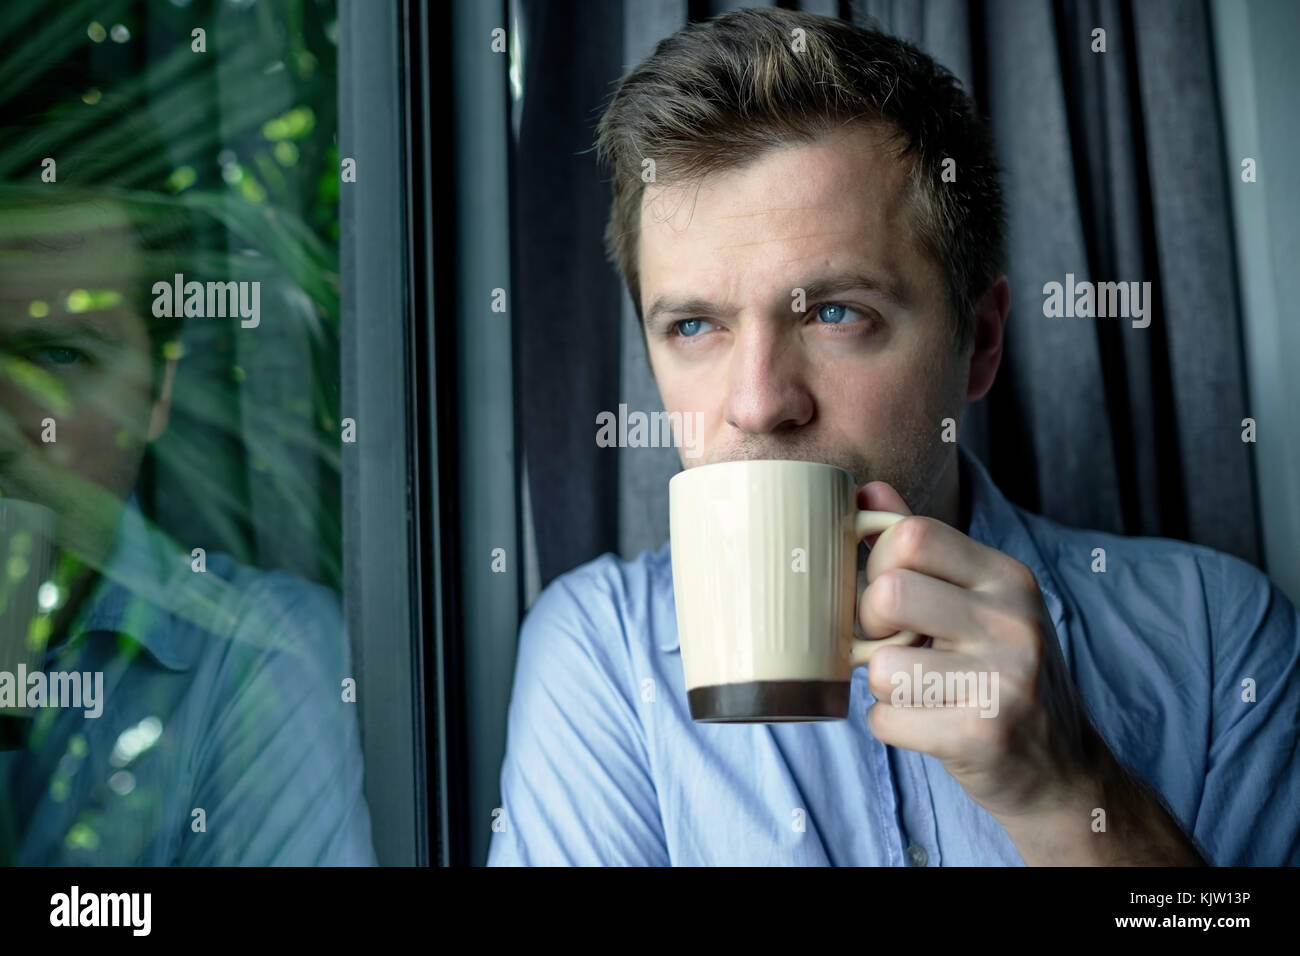 Close up portrait of businessman drinking coffee. man looking trough window and holding cup Stock Photo